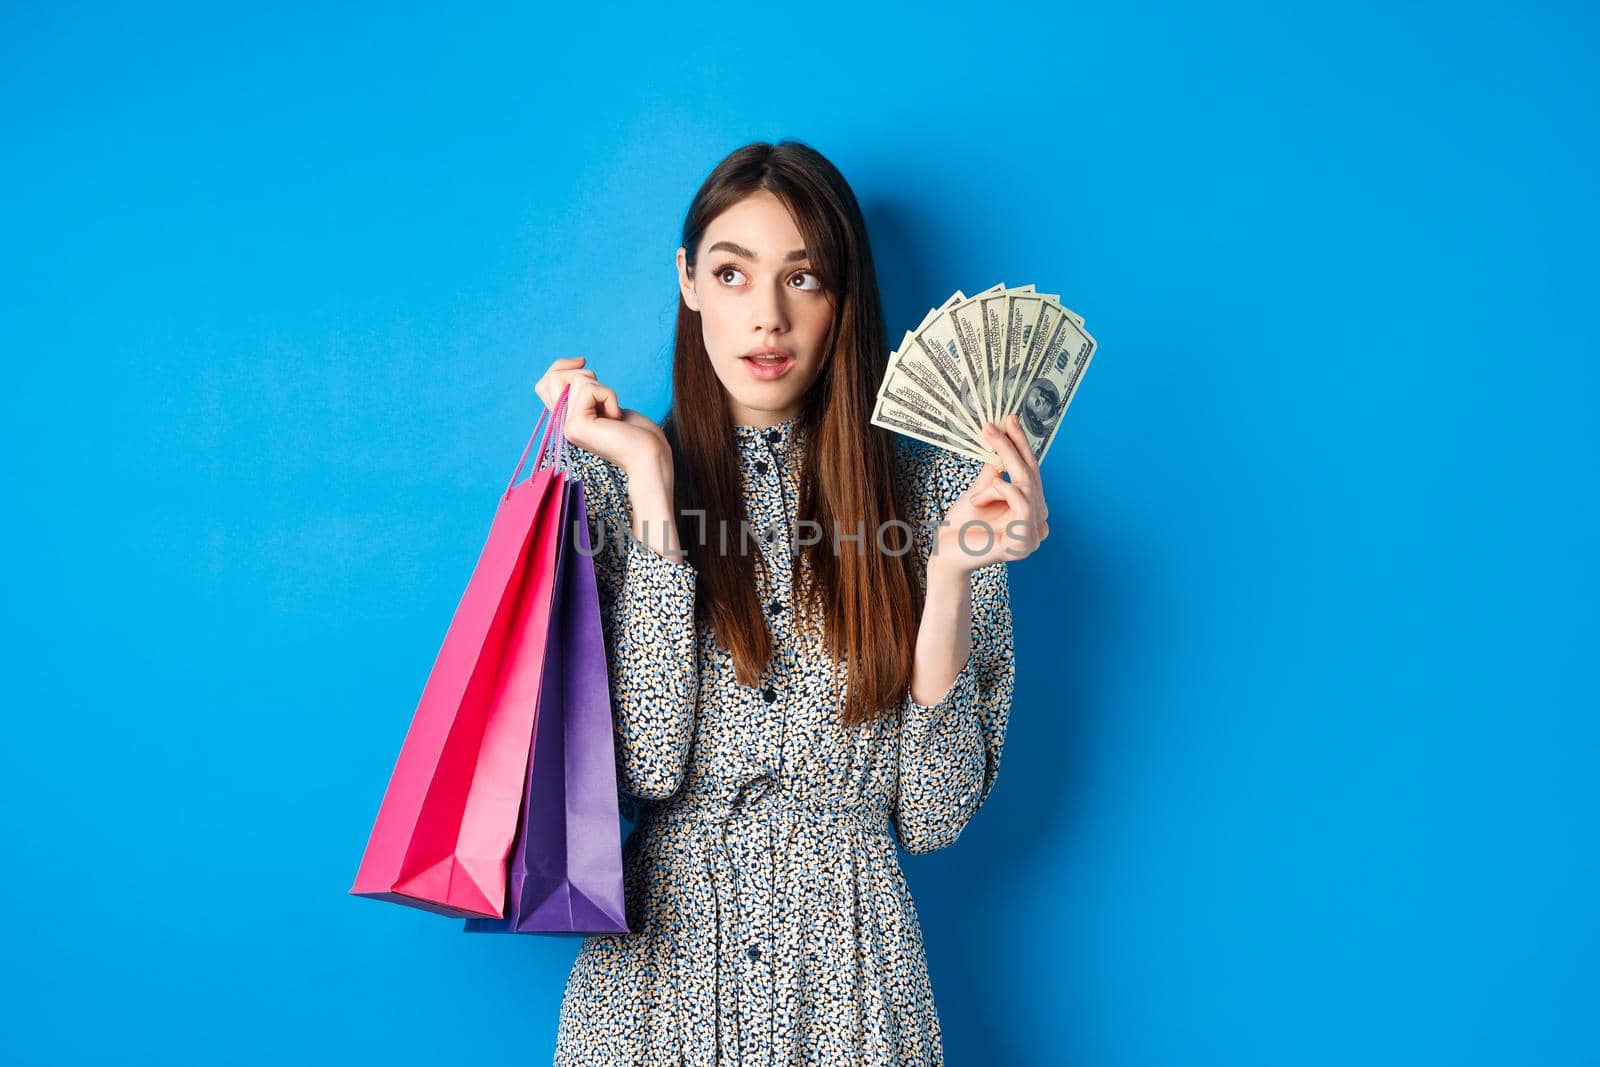 Shopping. Pretty woman thinking what to buy, looking left at logo, holding paper shop bags and money, standing on blue background.